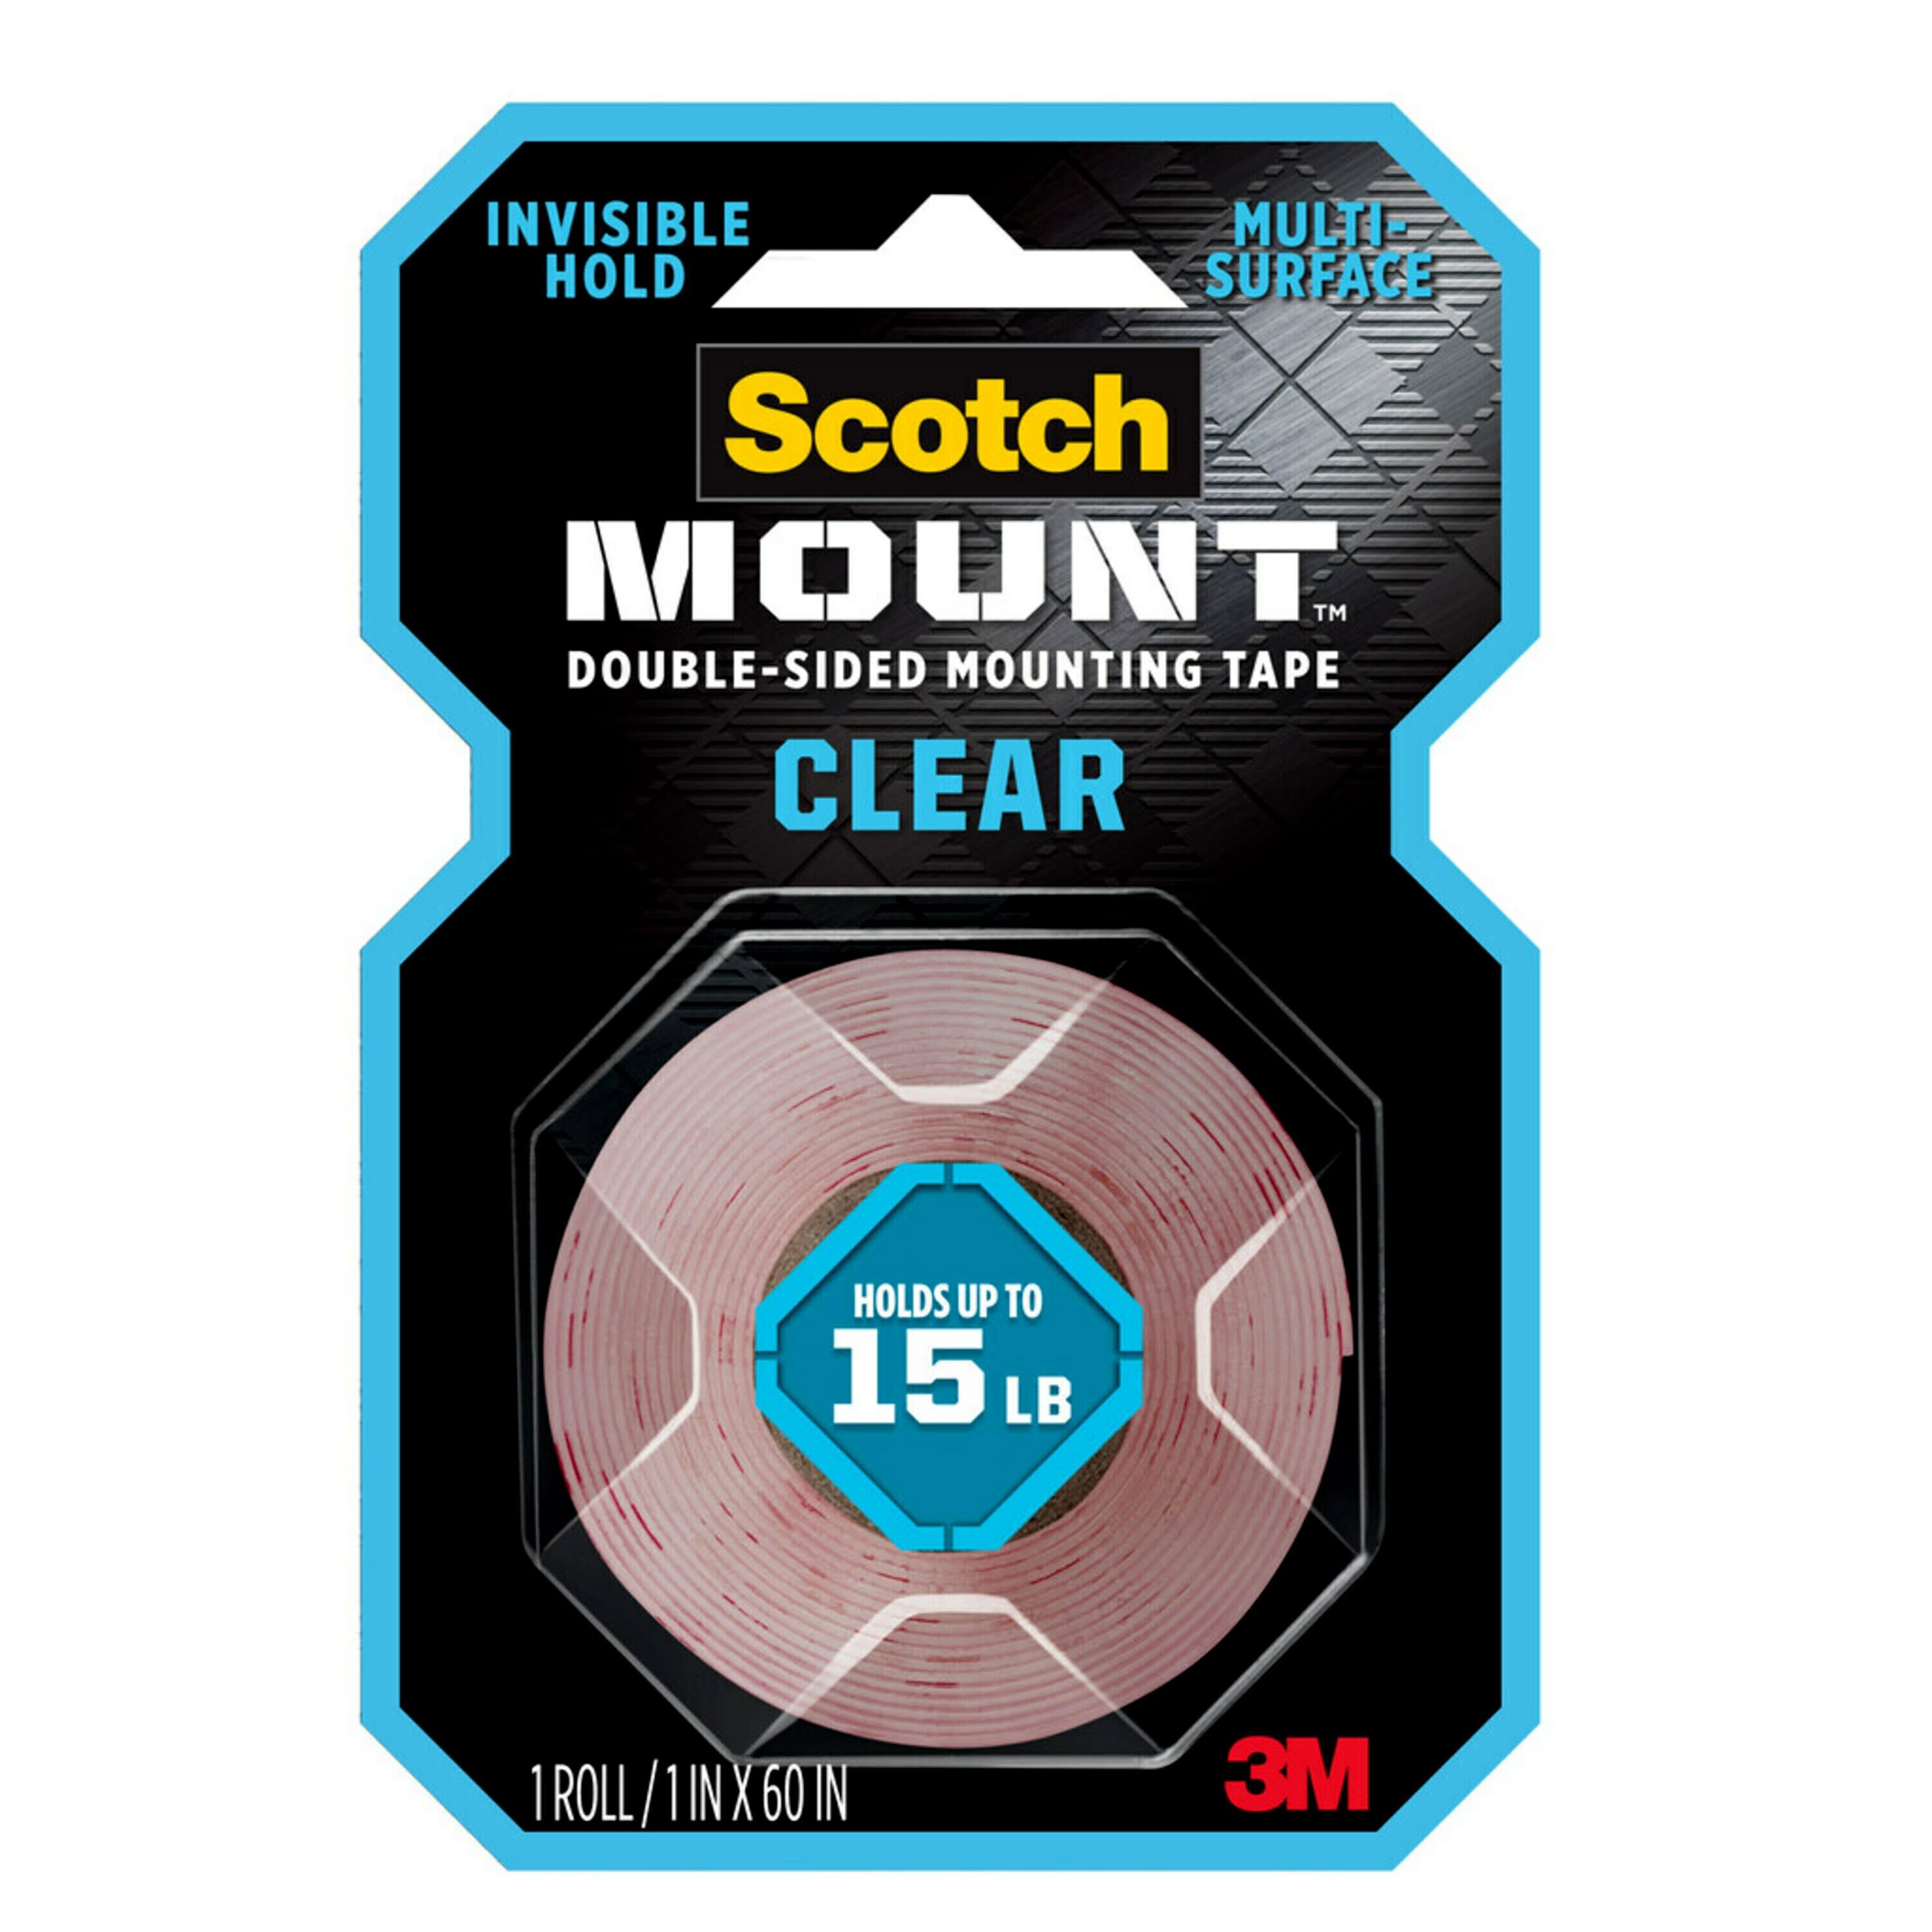 Scotch Double-Sided Tape 1/2 x 900 1 Core Clear